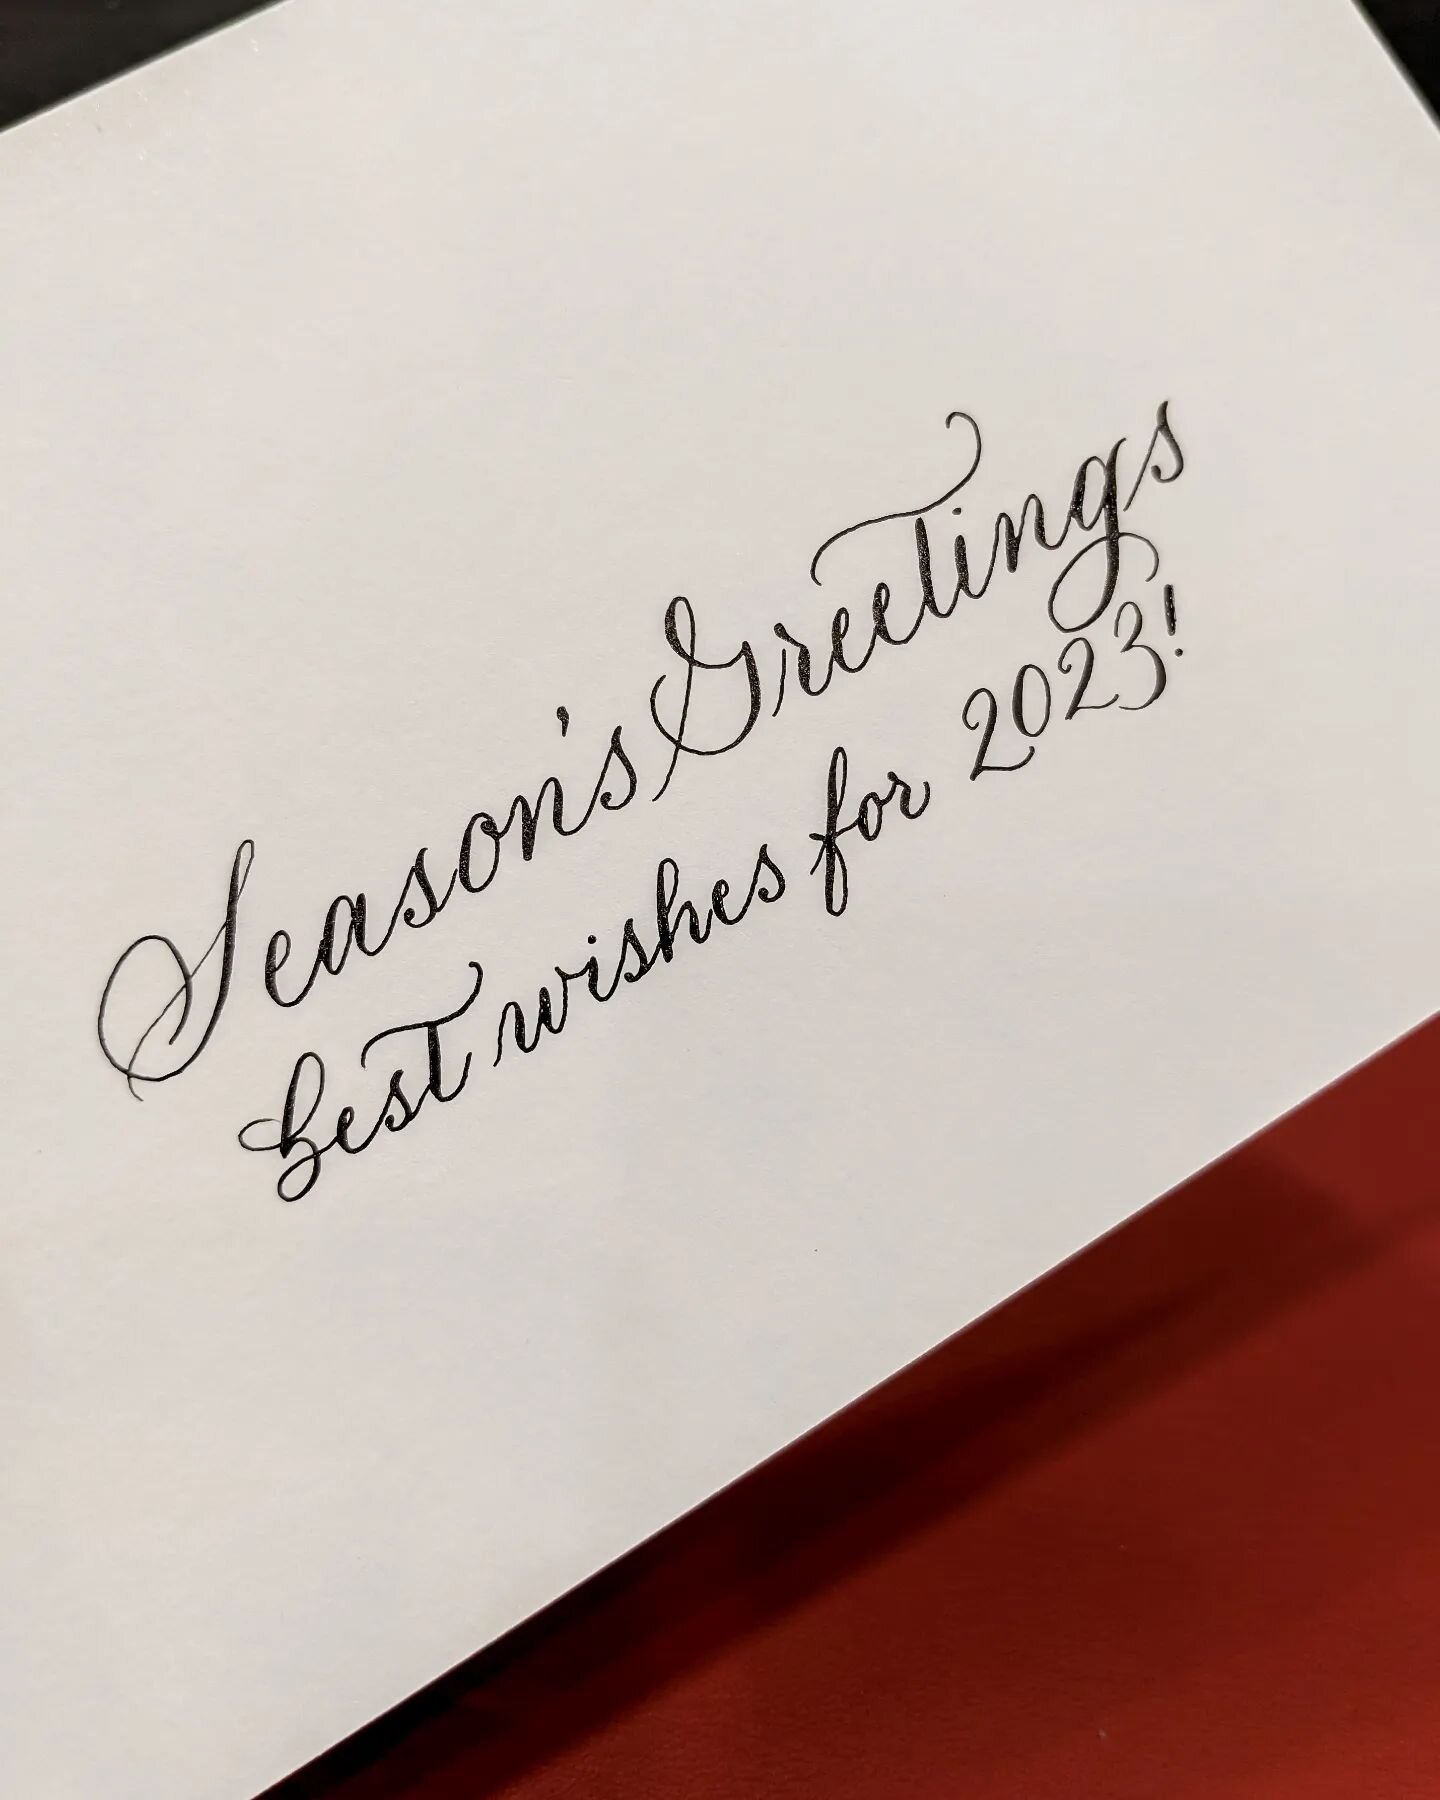 I don't have anything profound to say, all I have is - 2022, I'm over you. Let's gooooo 2023, I am SO ready and tbh I deserve to have an incredible year 🥂🎉🍾 who's with me!?

#seasonsgreetings2023 #calligrapher #calligraphyevent #classicwedding #bl